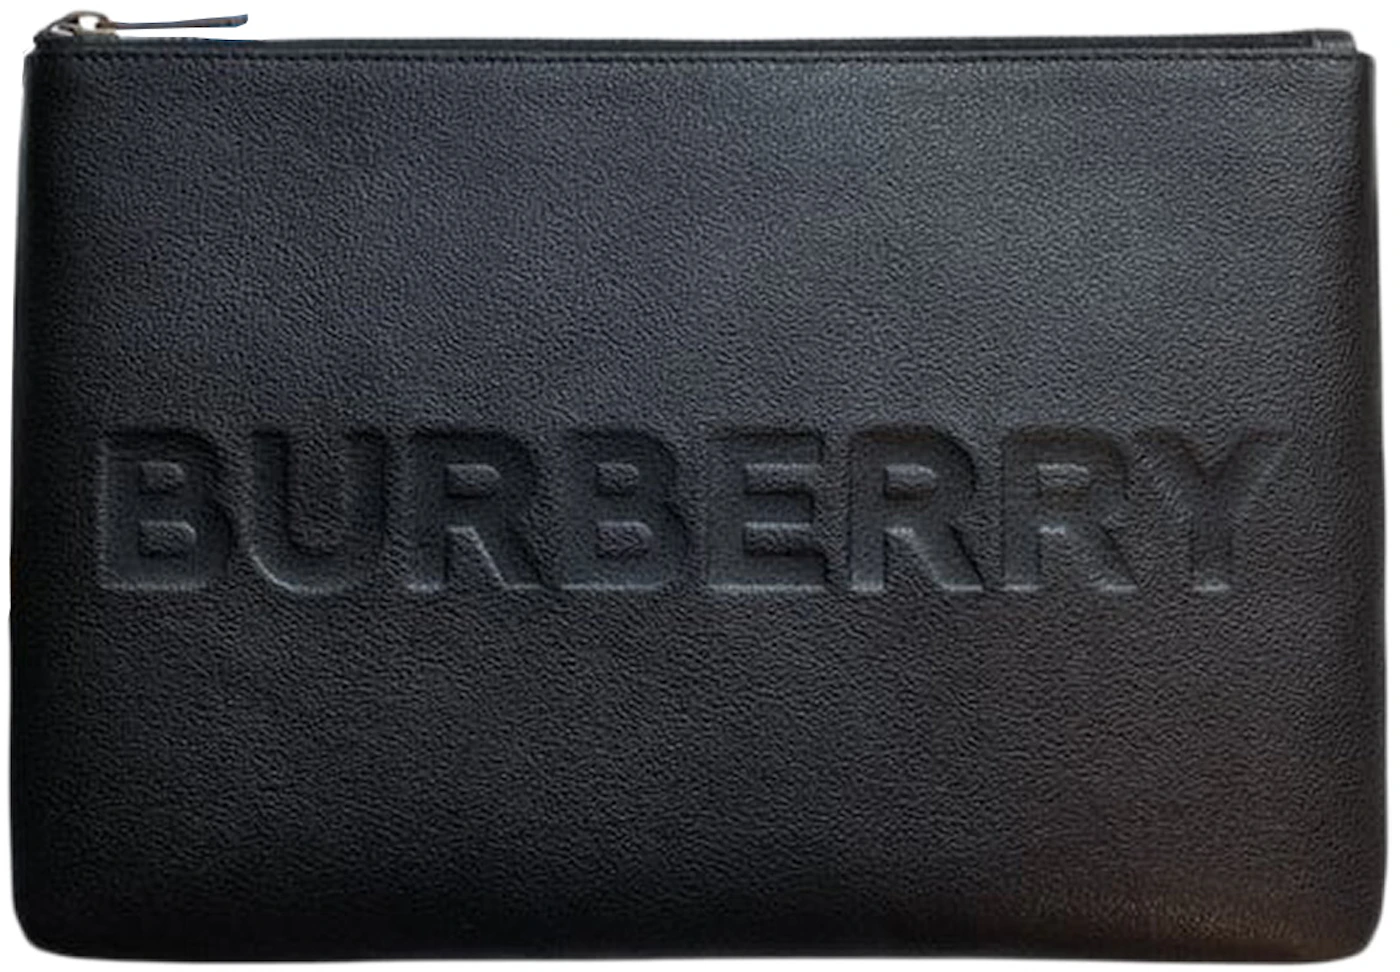 Burberry Embossed Leather Pouch Black in Calfskin Leather with Silver ...